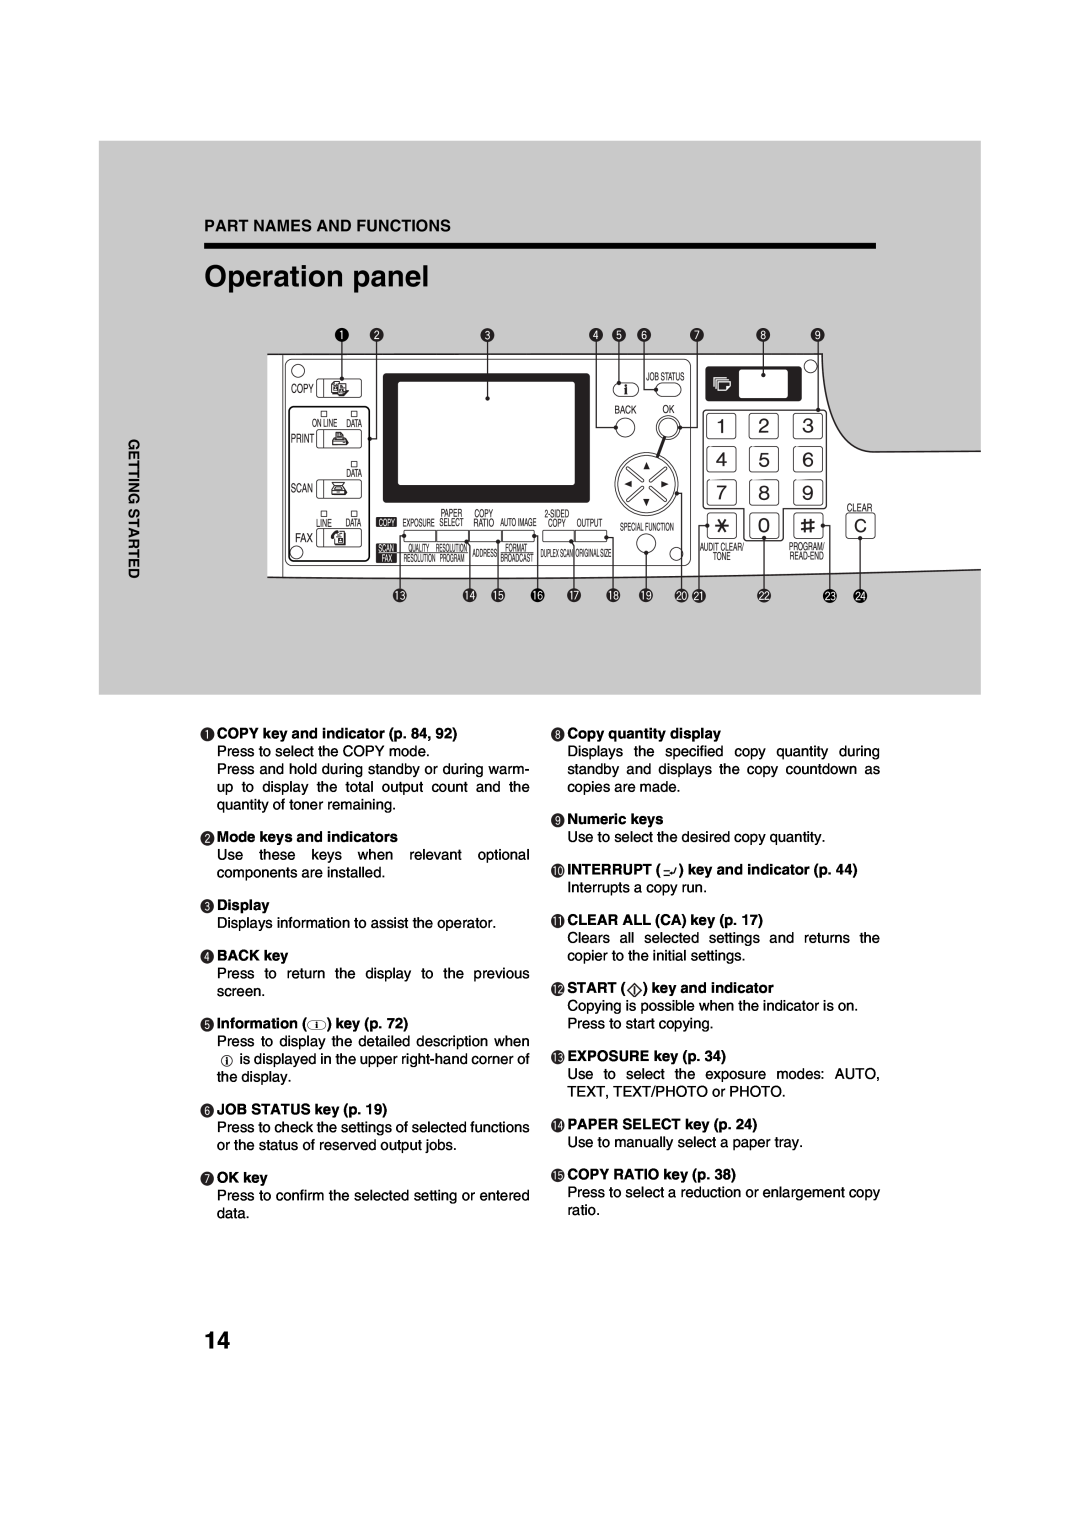 Sharp AR-M208 operation manual Operation panel, Part Names And Functions 